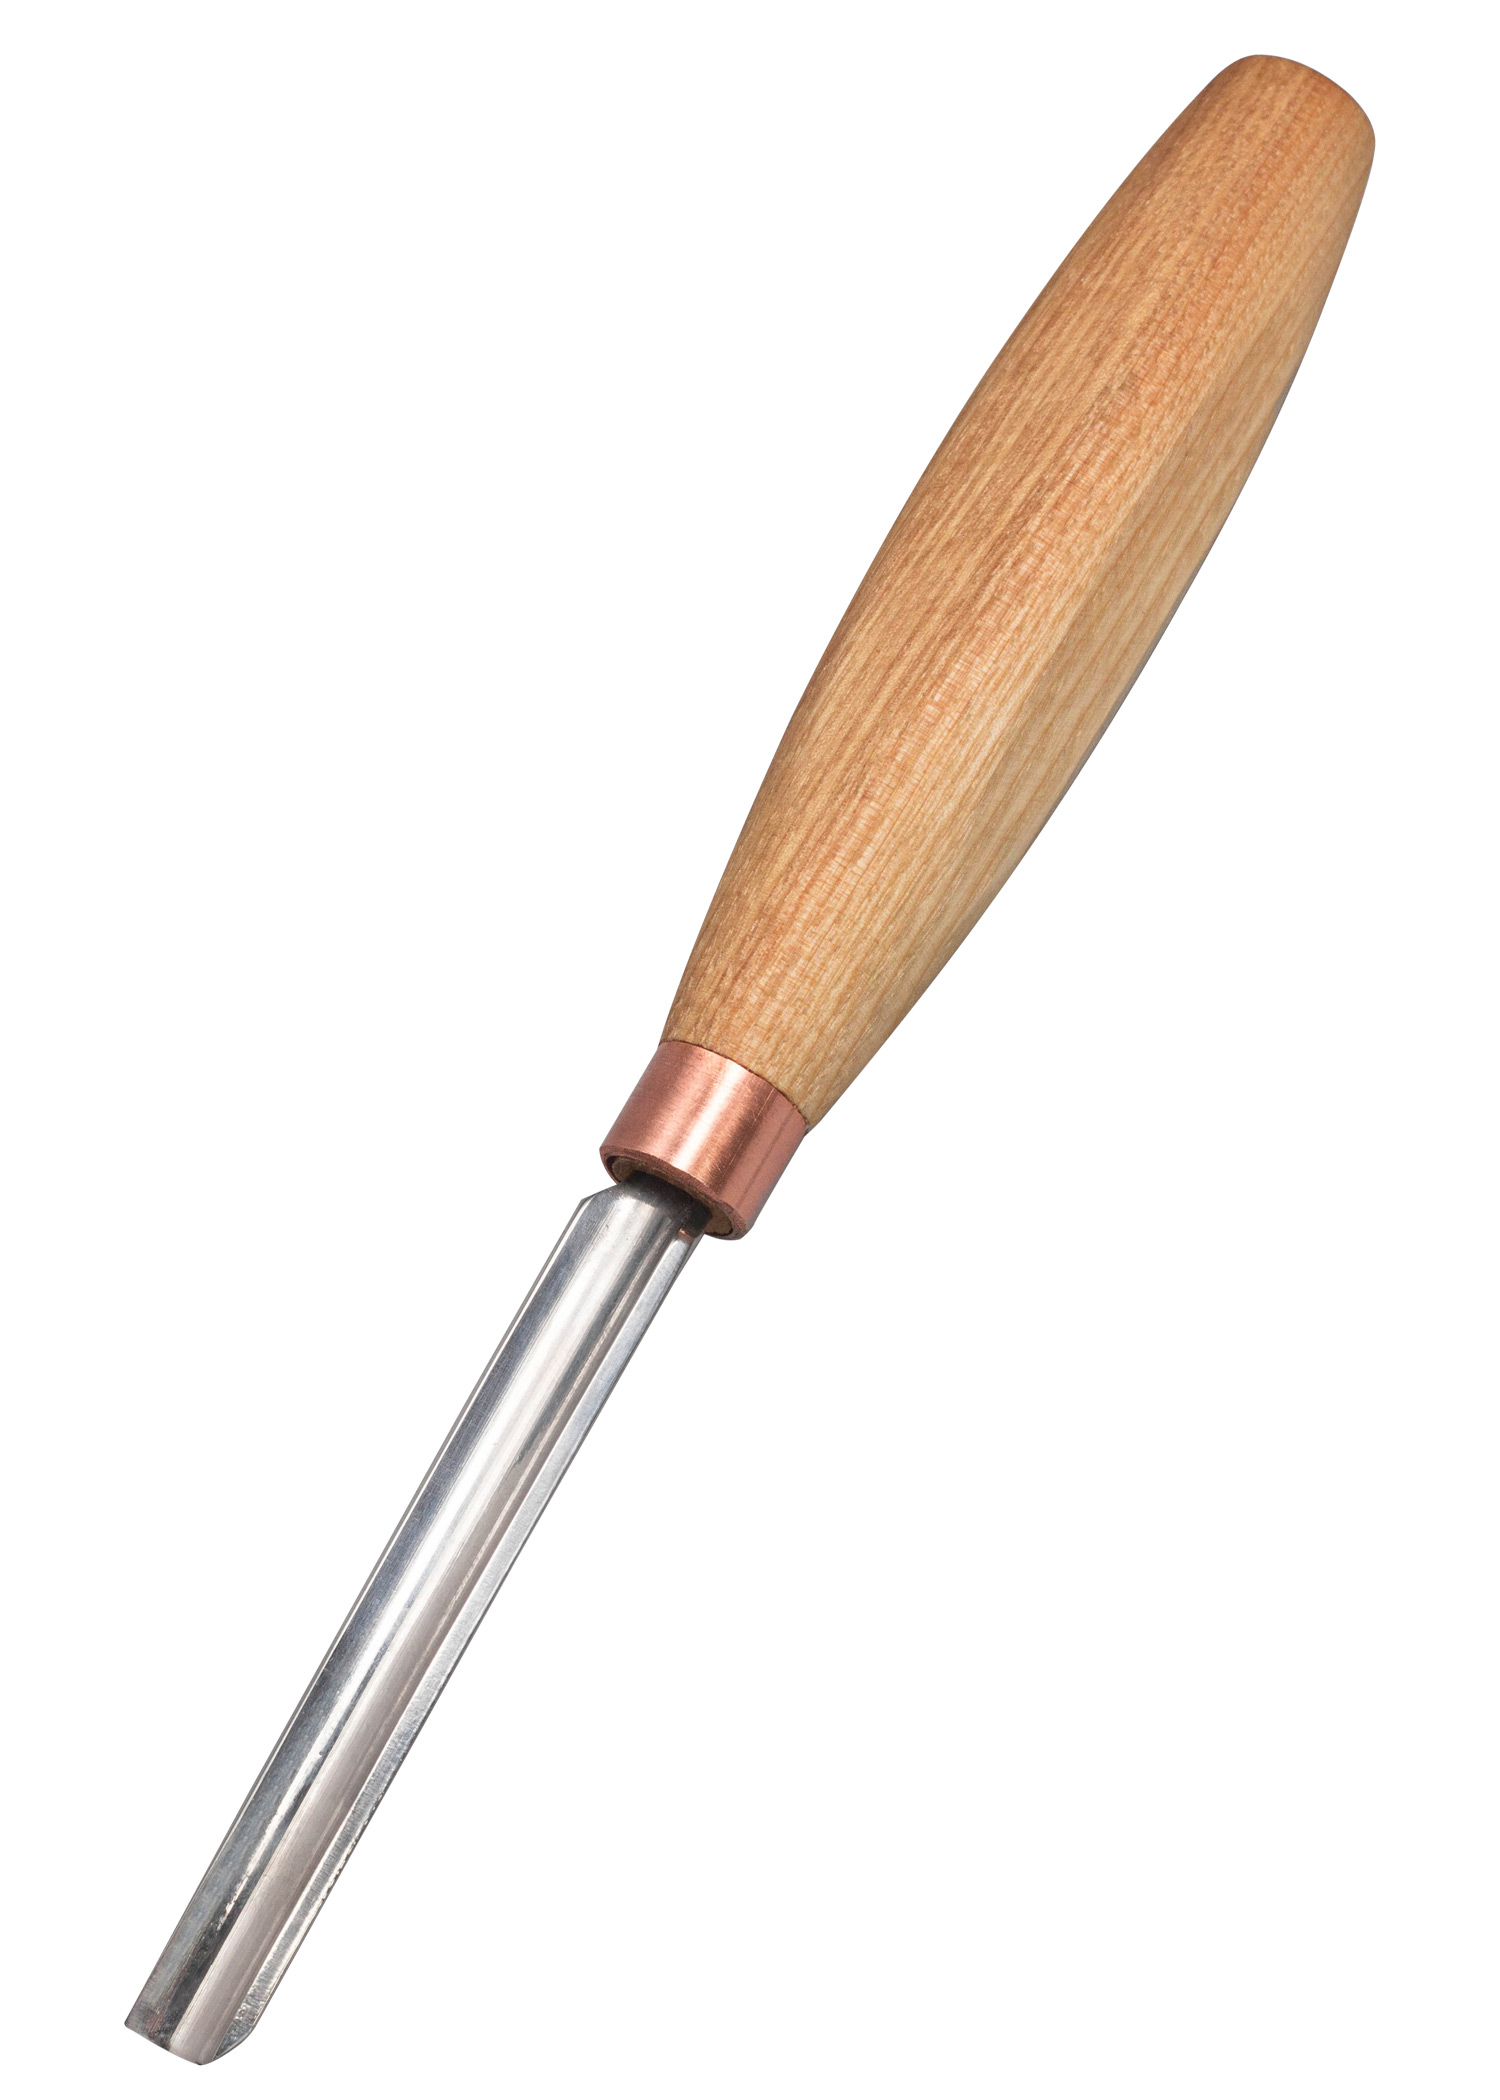 bc-p9_10_beavercraft_palm_size_straight_rounded_chisel_sweep_p9_10mm_stecheisen_ciseaux